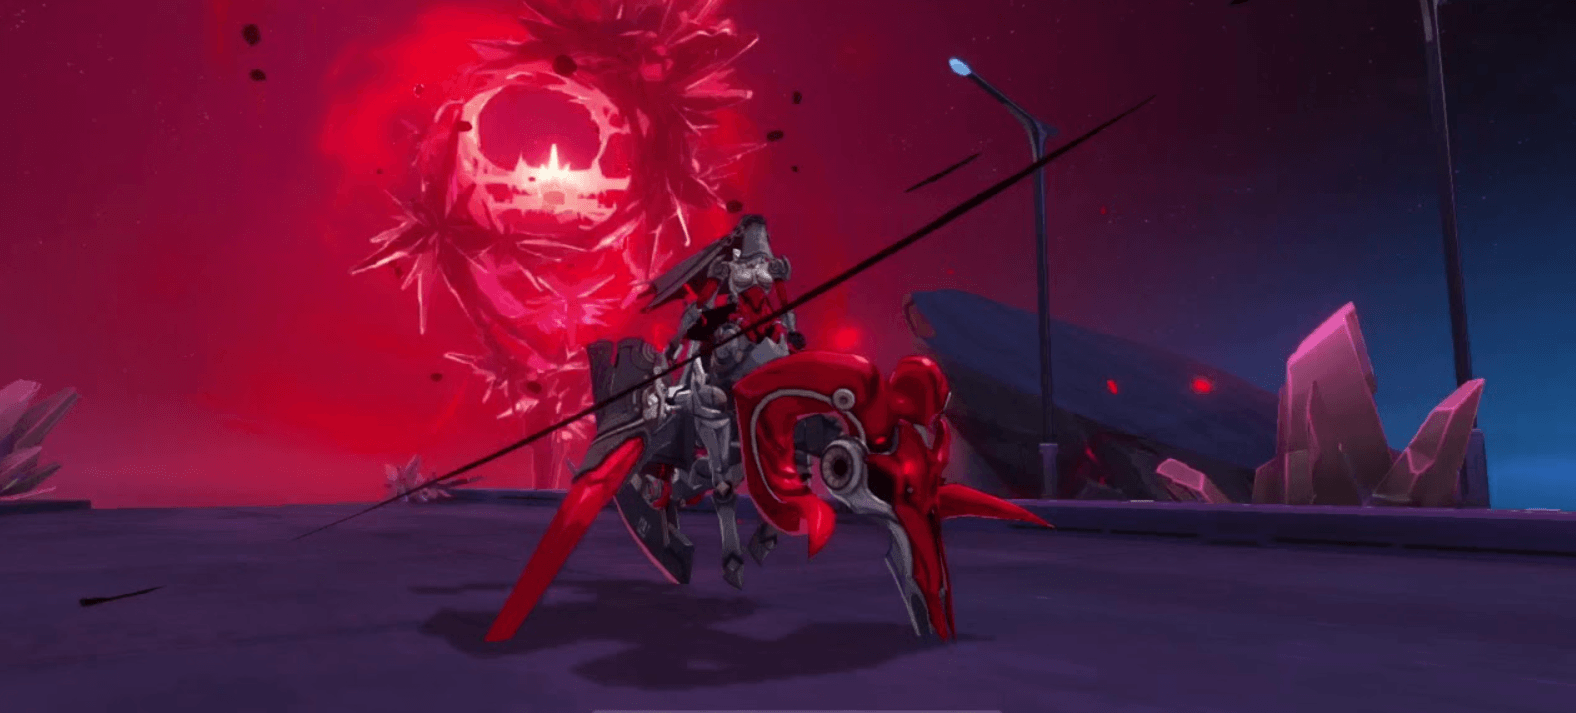 Honkai Impact 3rd Version 7.0: A Reunion Under the Blood Moon and a Glimpse into the Future